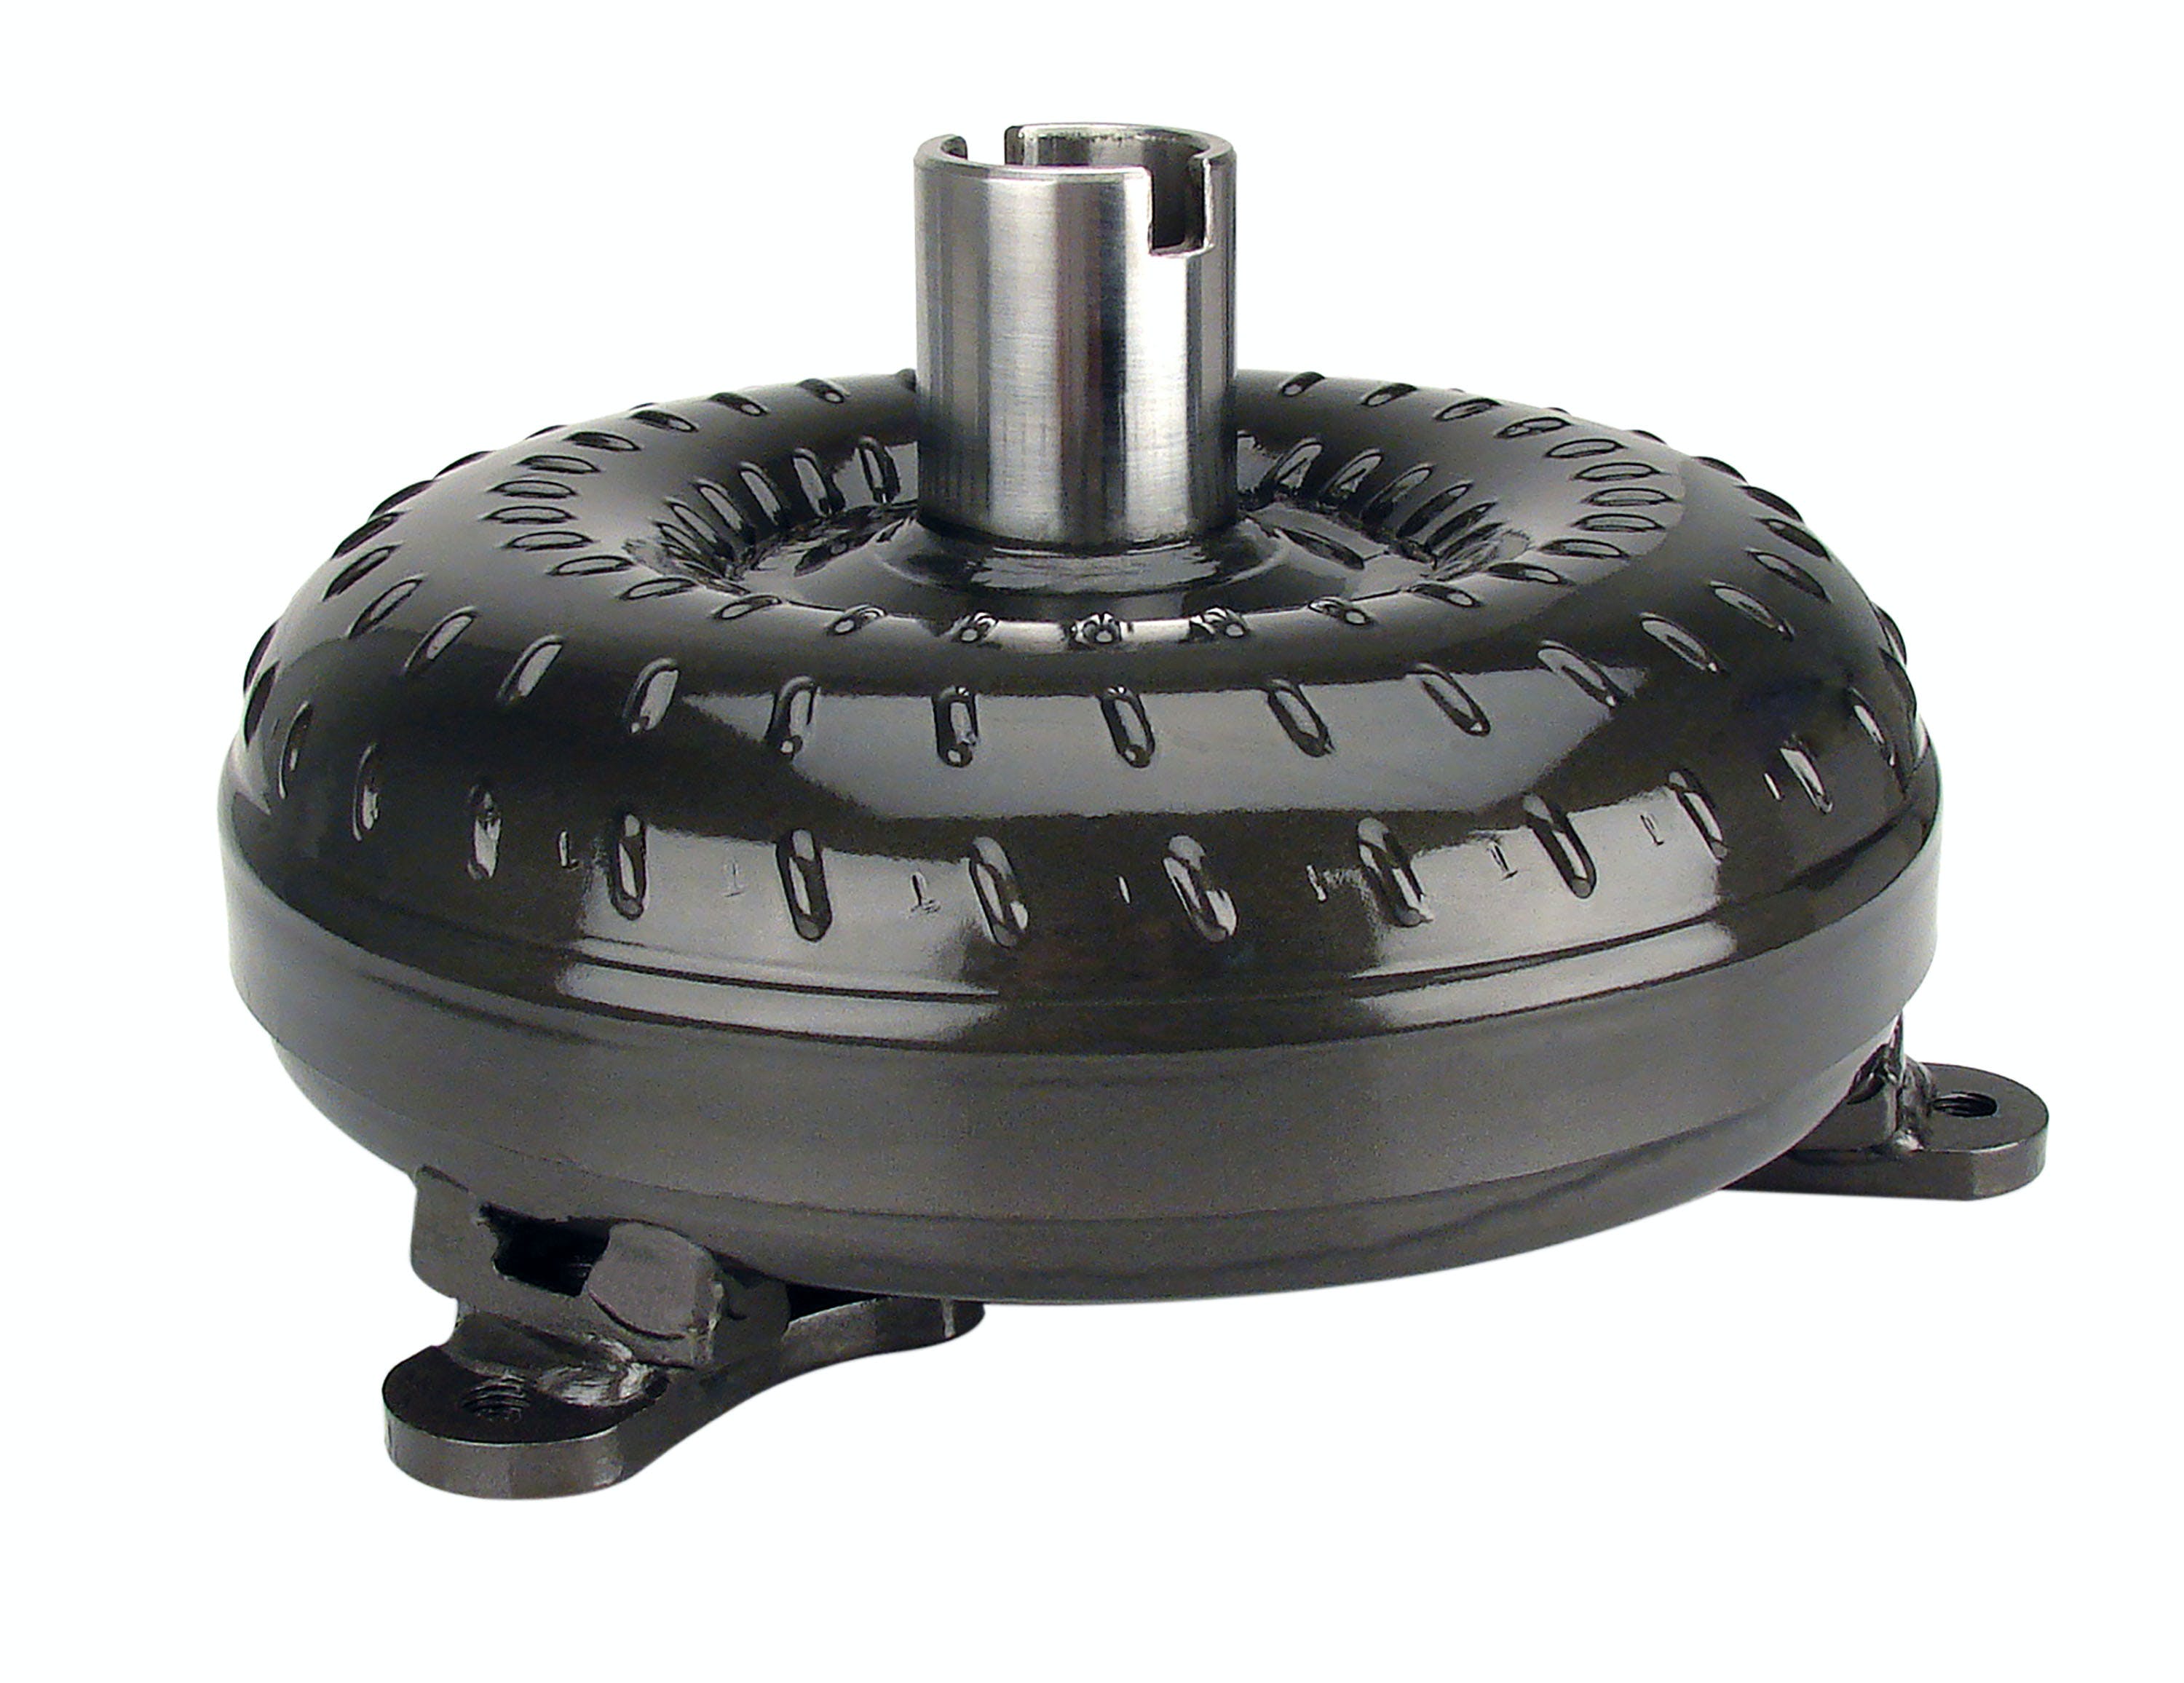 TCI Automotive 741150 Powerglide Non-Functional Torque Converter for Circle Track Applications